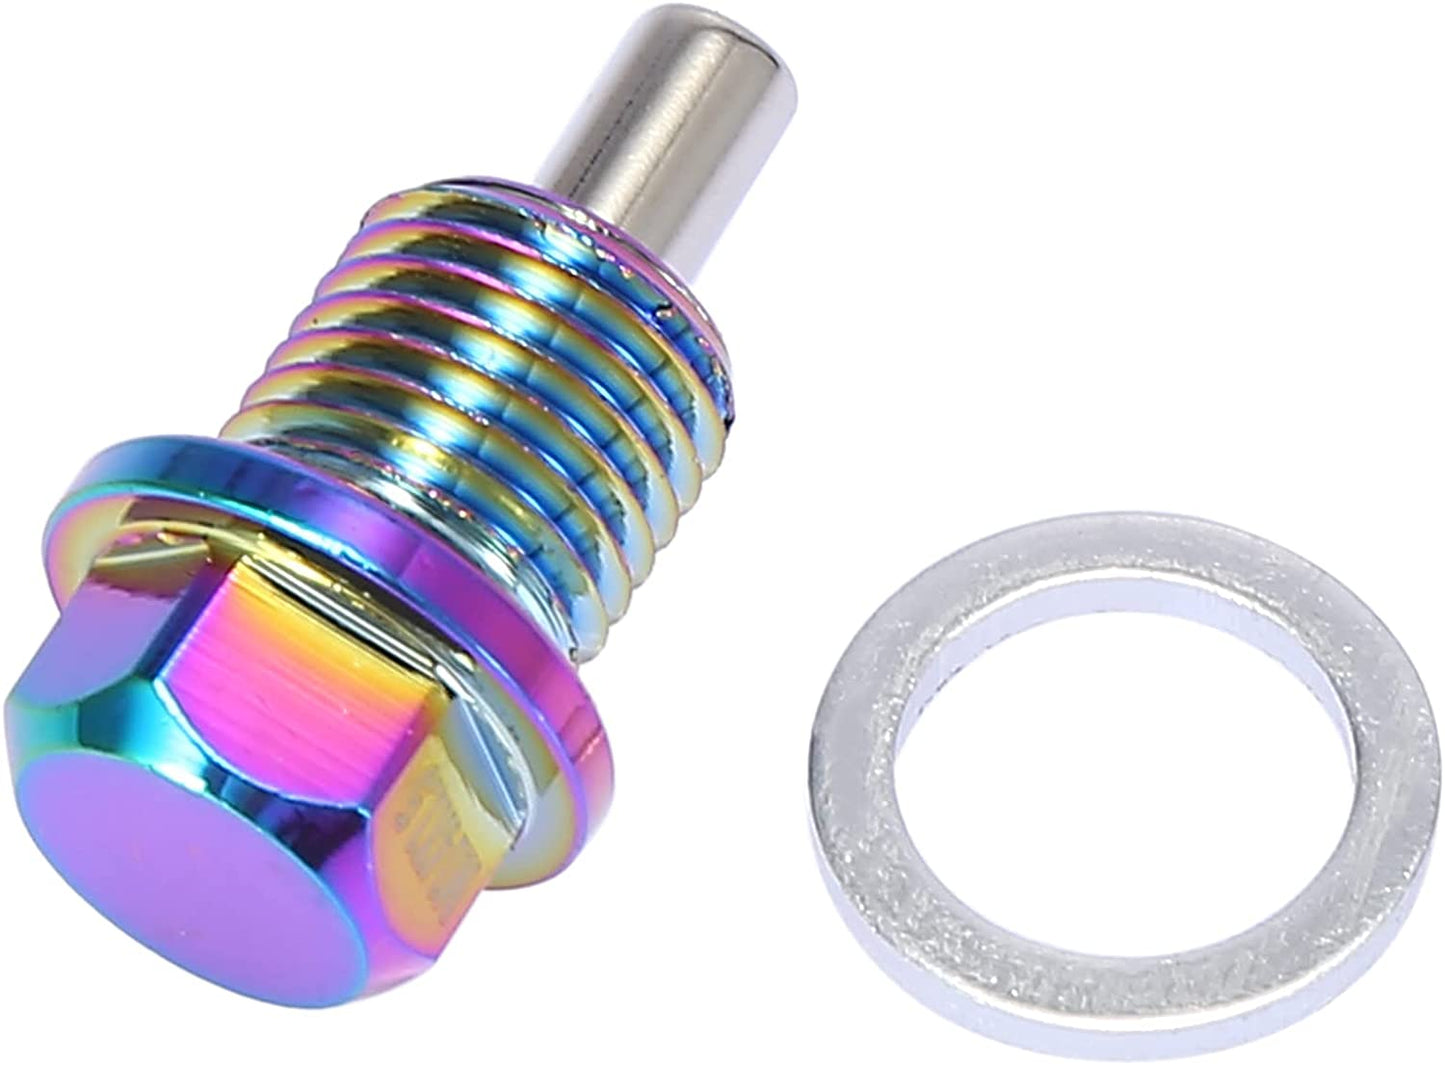 M14-1.5 Multicolor Magnetic Oil Drain Plug with Gaskets for Universal Car